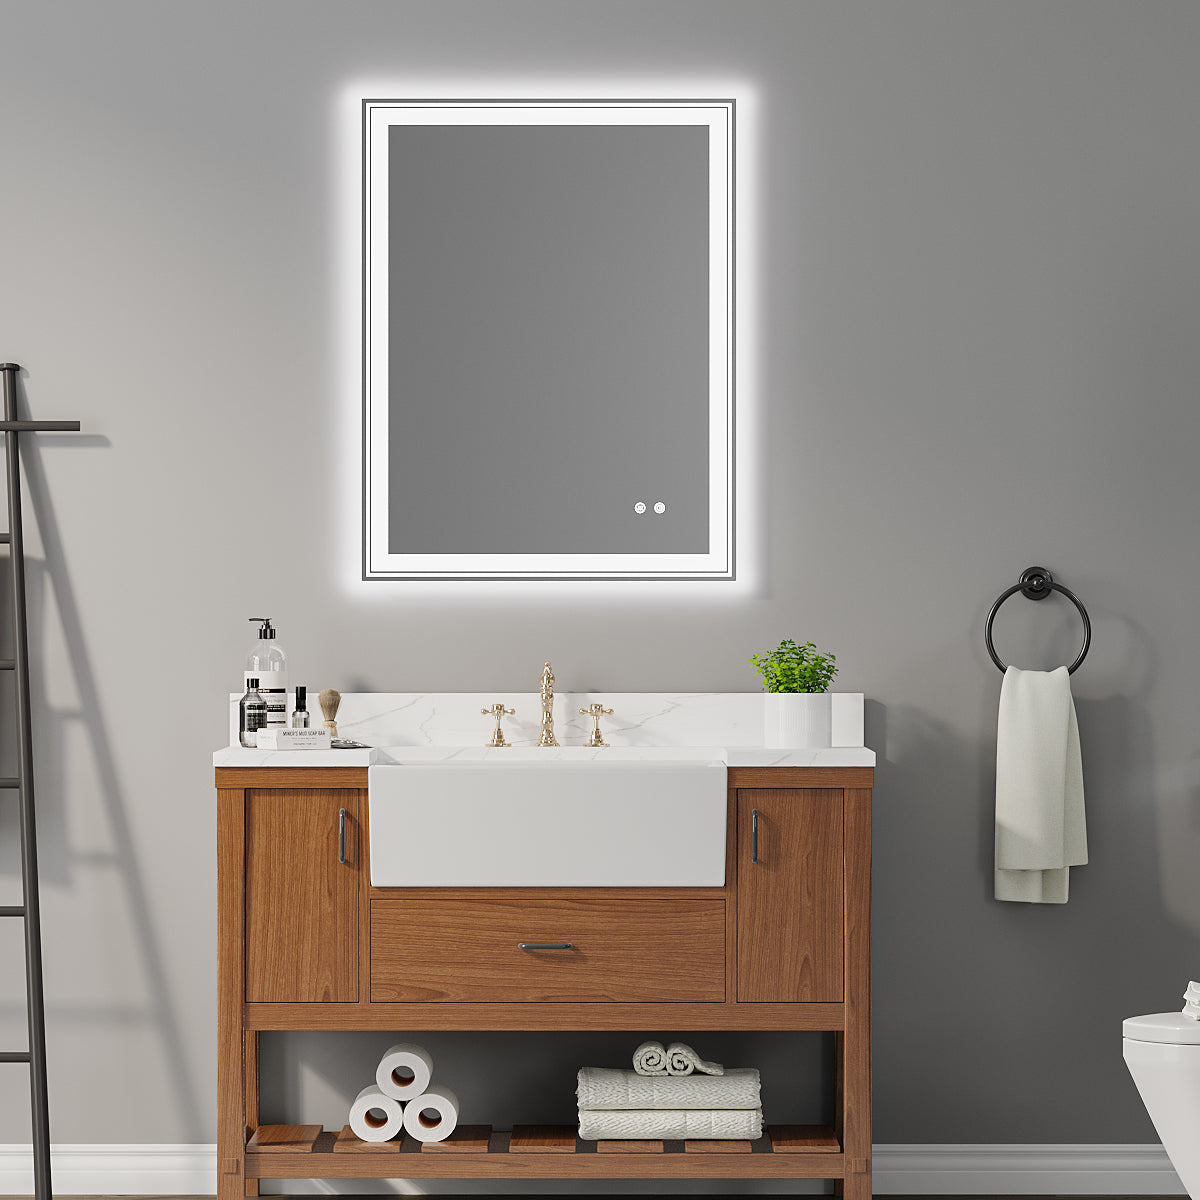 36"×28" inch LED Bathroom Vanity Mirror with Anti-Fog and Adjustable Brightness front and back light